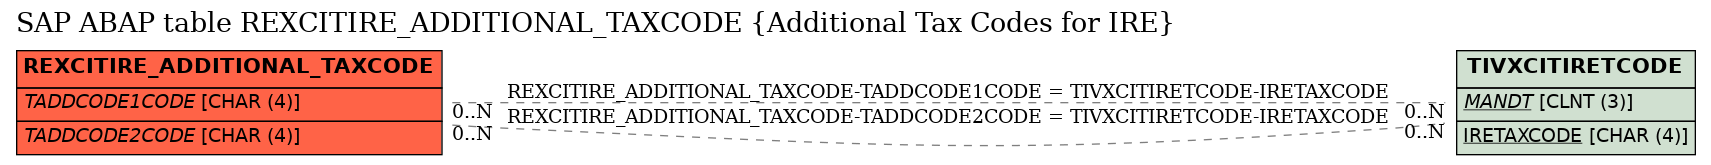 E-R Diagram for table REXCITIRE_ADDITIONAL_TAXCODE (Additional Tax Codes for IRE)